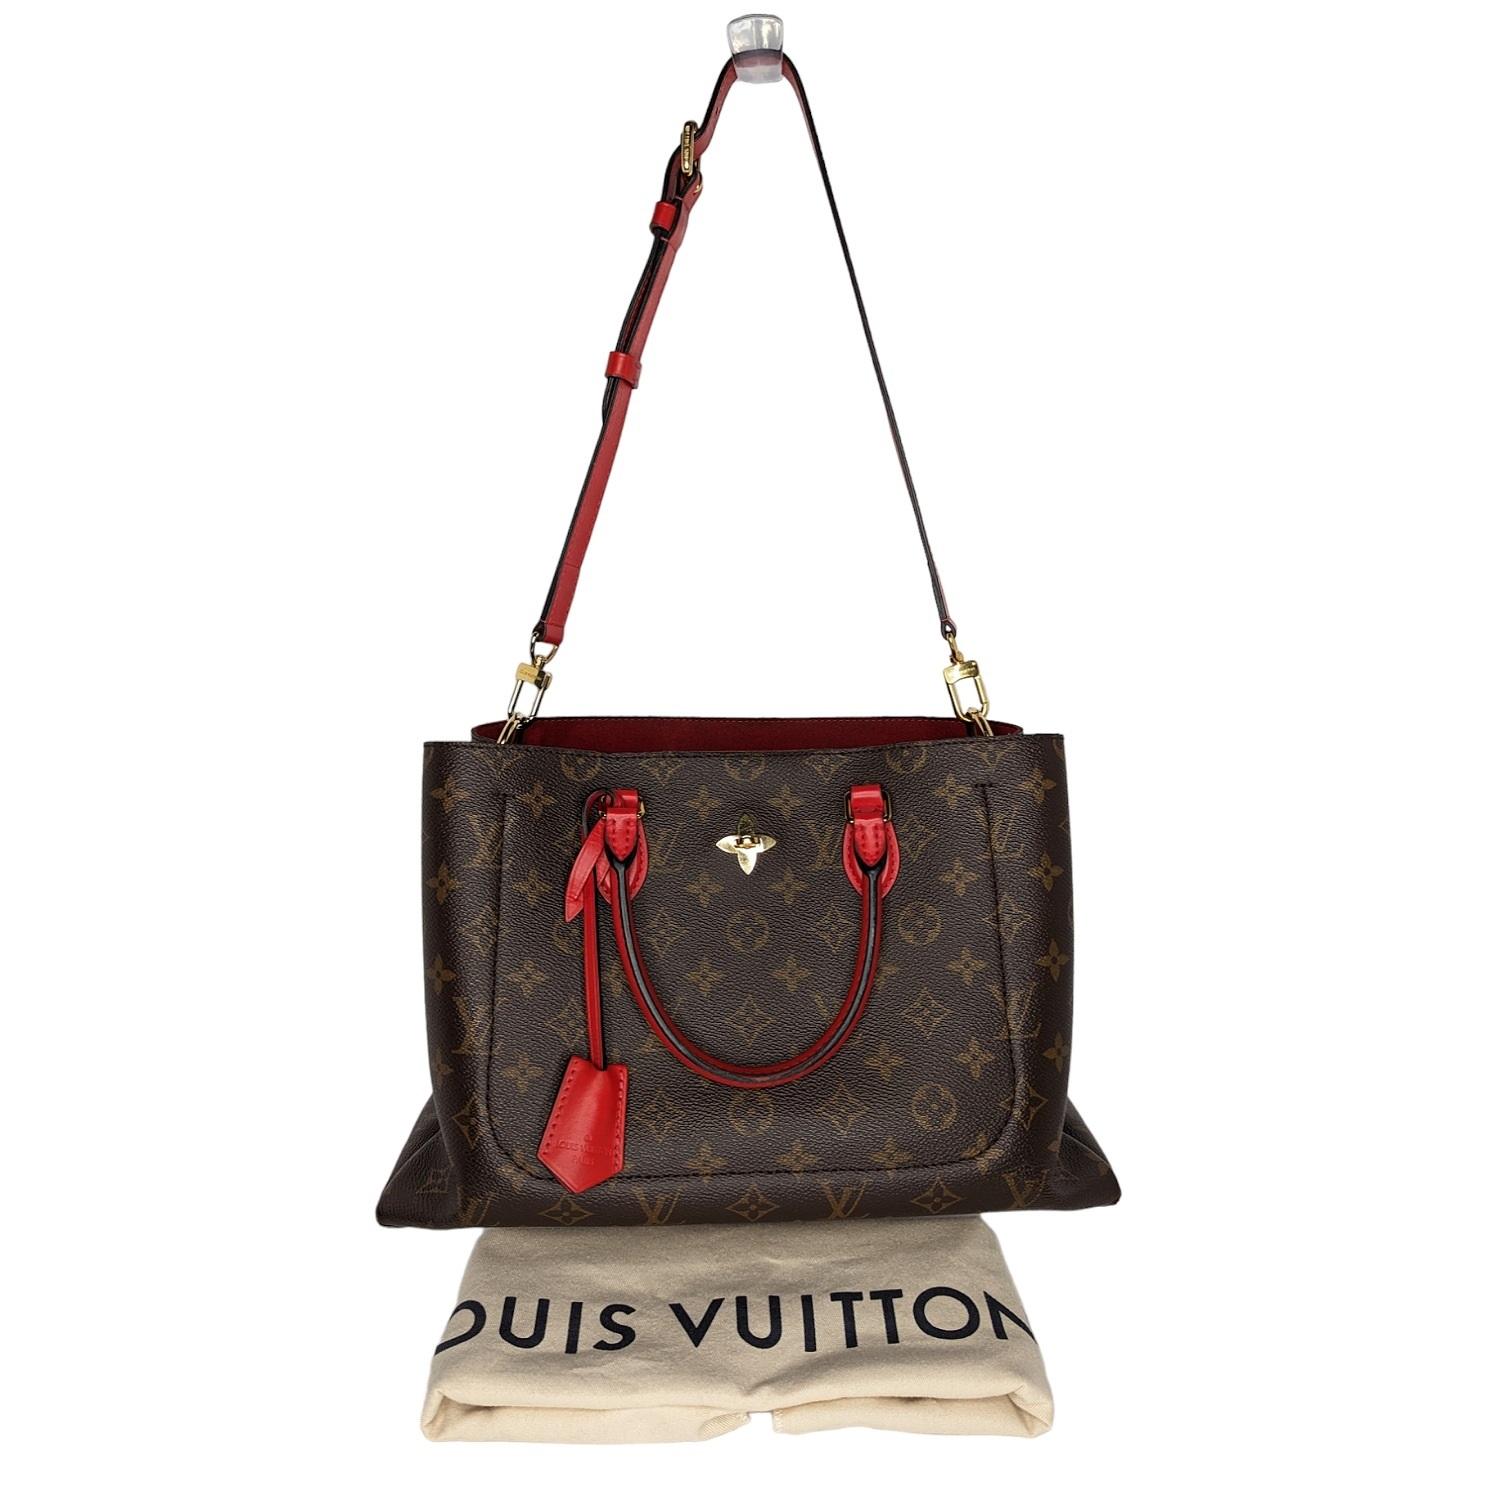 This chic and modern Flower Tote is a new creation from Louis Vuitton. This hobo features Monogram canvas, rolled leather handles, and a Monogram Flower padlock. The interior has one zipped pocket, two flat pockets, and is spacious enough for all